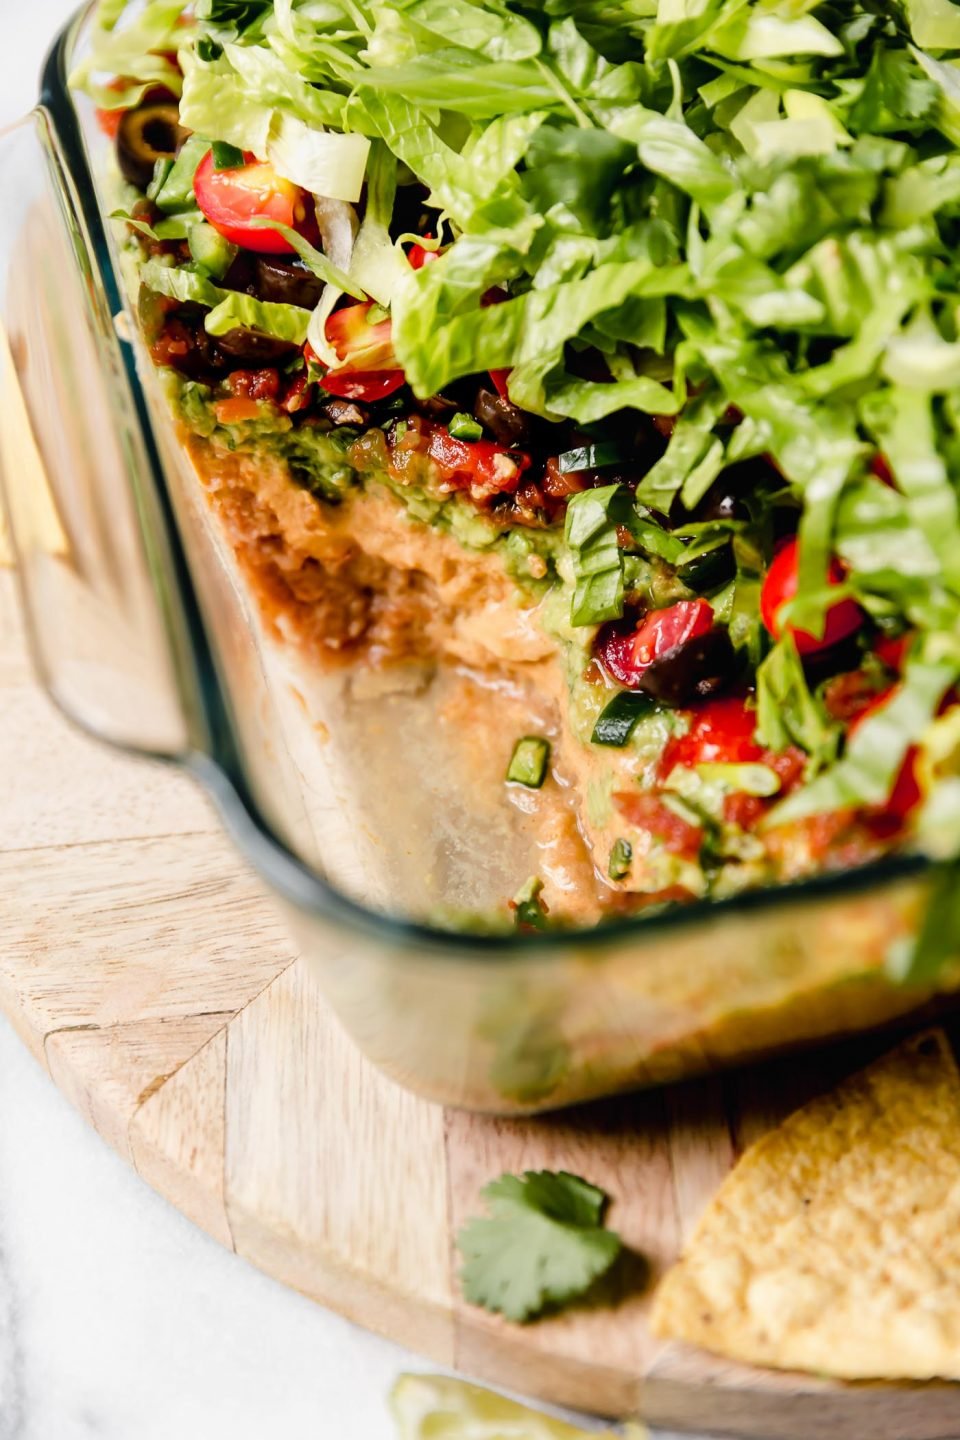 Straight-on photo of this vegan 7-Layer Dip recipe shown in clear Pyrex DEEP baking dish. The dish is sitting on a light wood board, with some of the dip removed from the container.